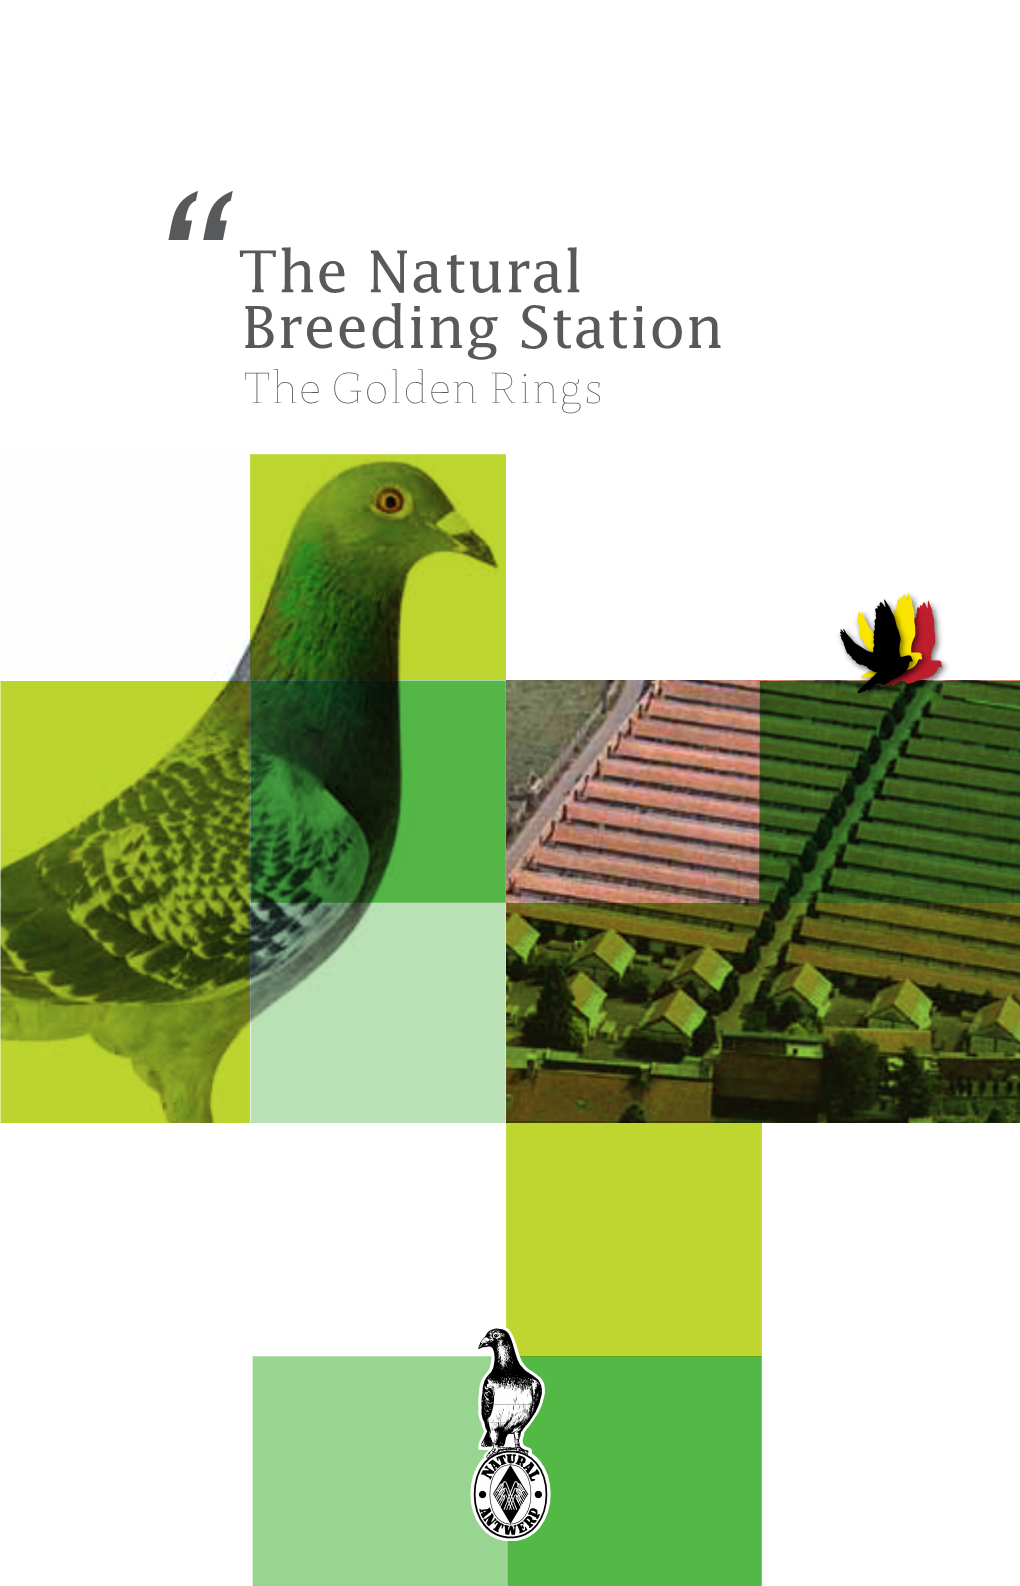 The Natural Breeding Station the Golden Rings the Largest Breeding Station for Racing Pigeons in the World Was an Enormous Challenge